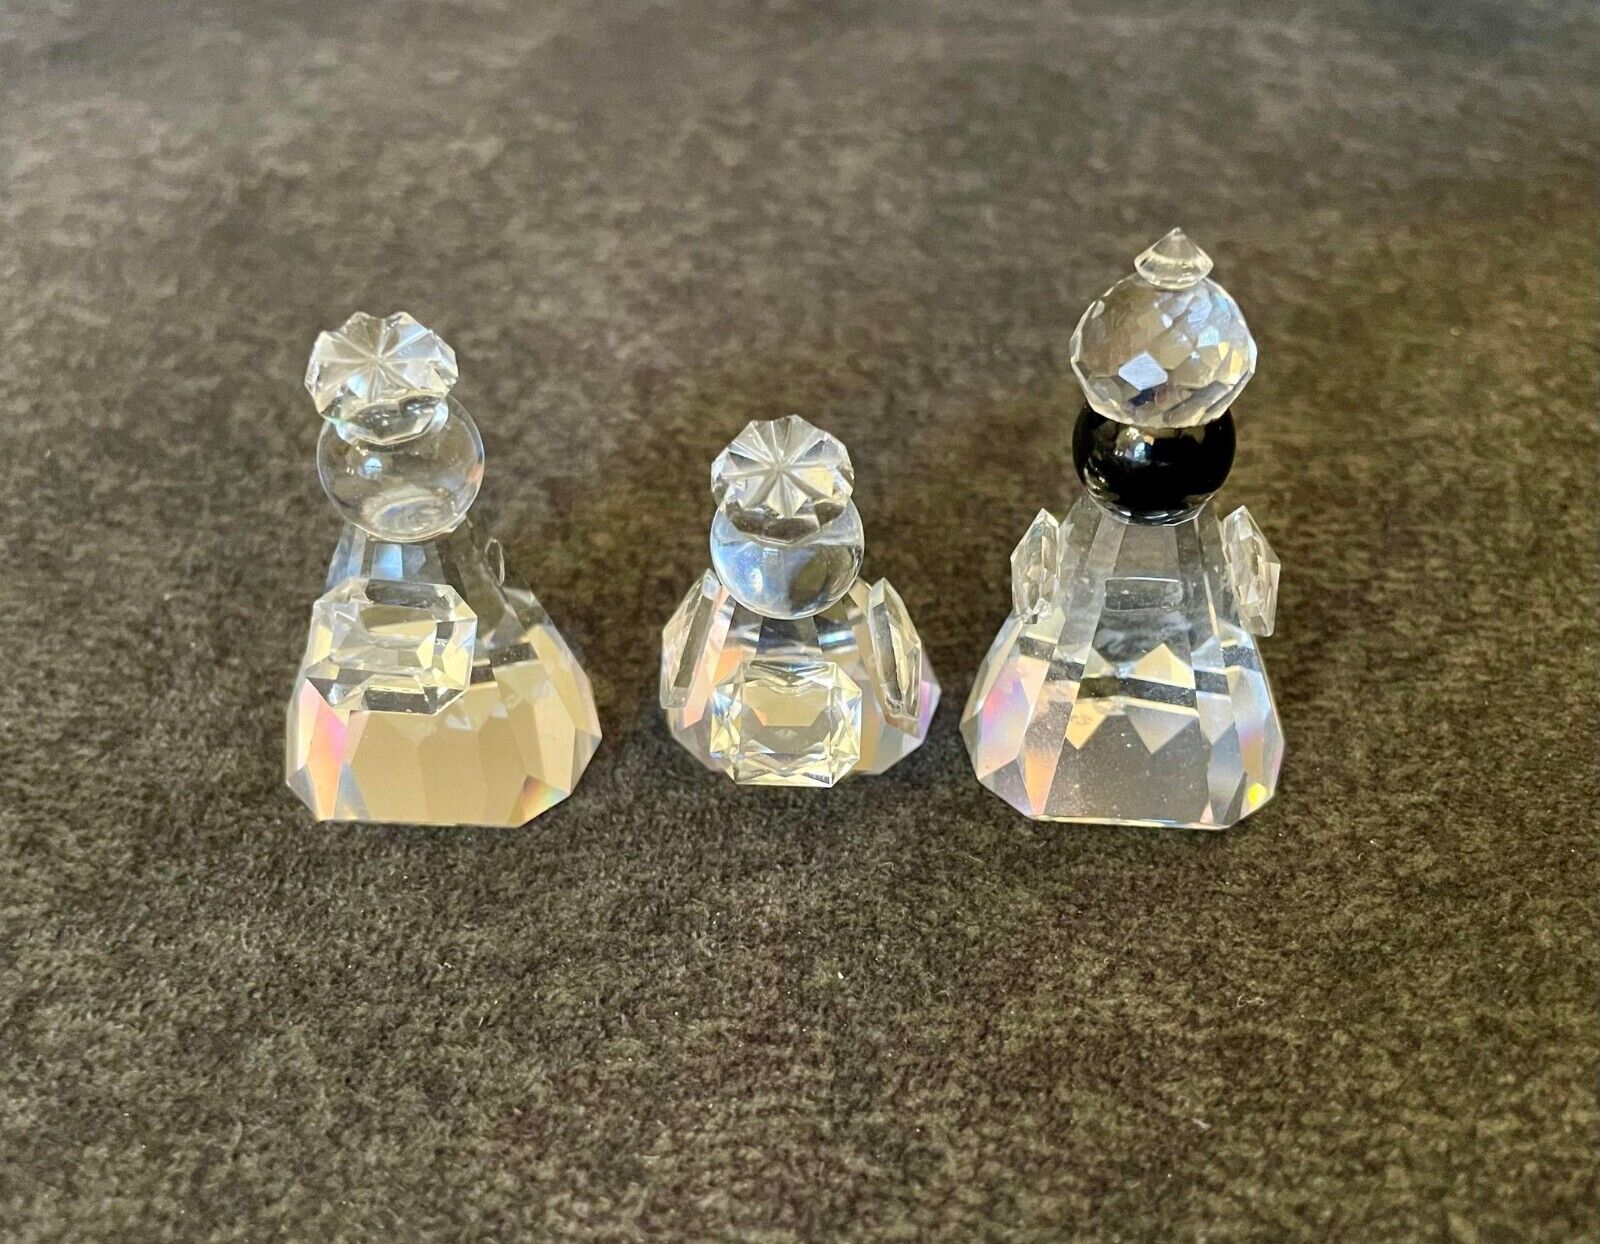 Vintage Swarovski Silver Crystal Three Wise Men 1992 Small Missing Parts - AS/IS